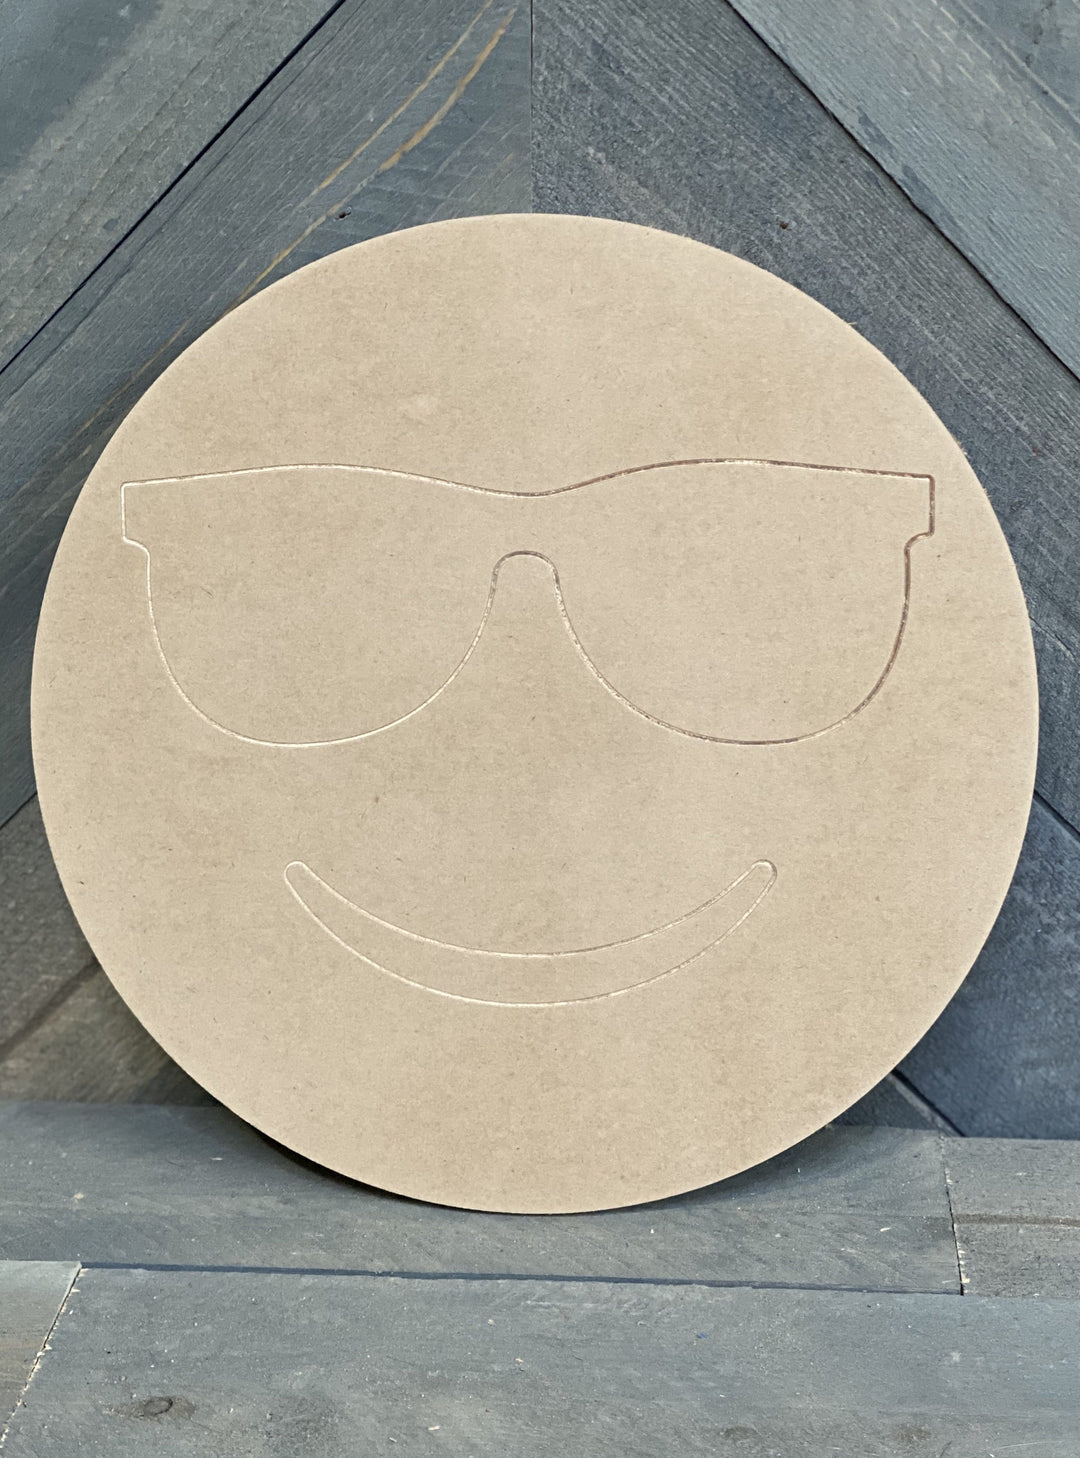 Sunglasses Emoji Blank ready for you to paint